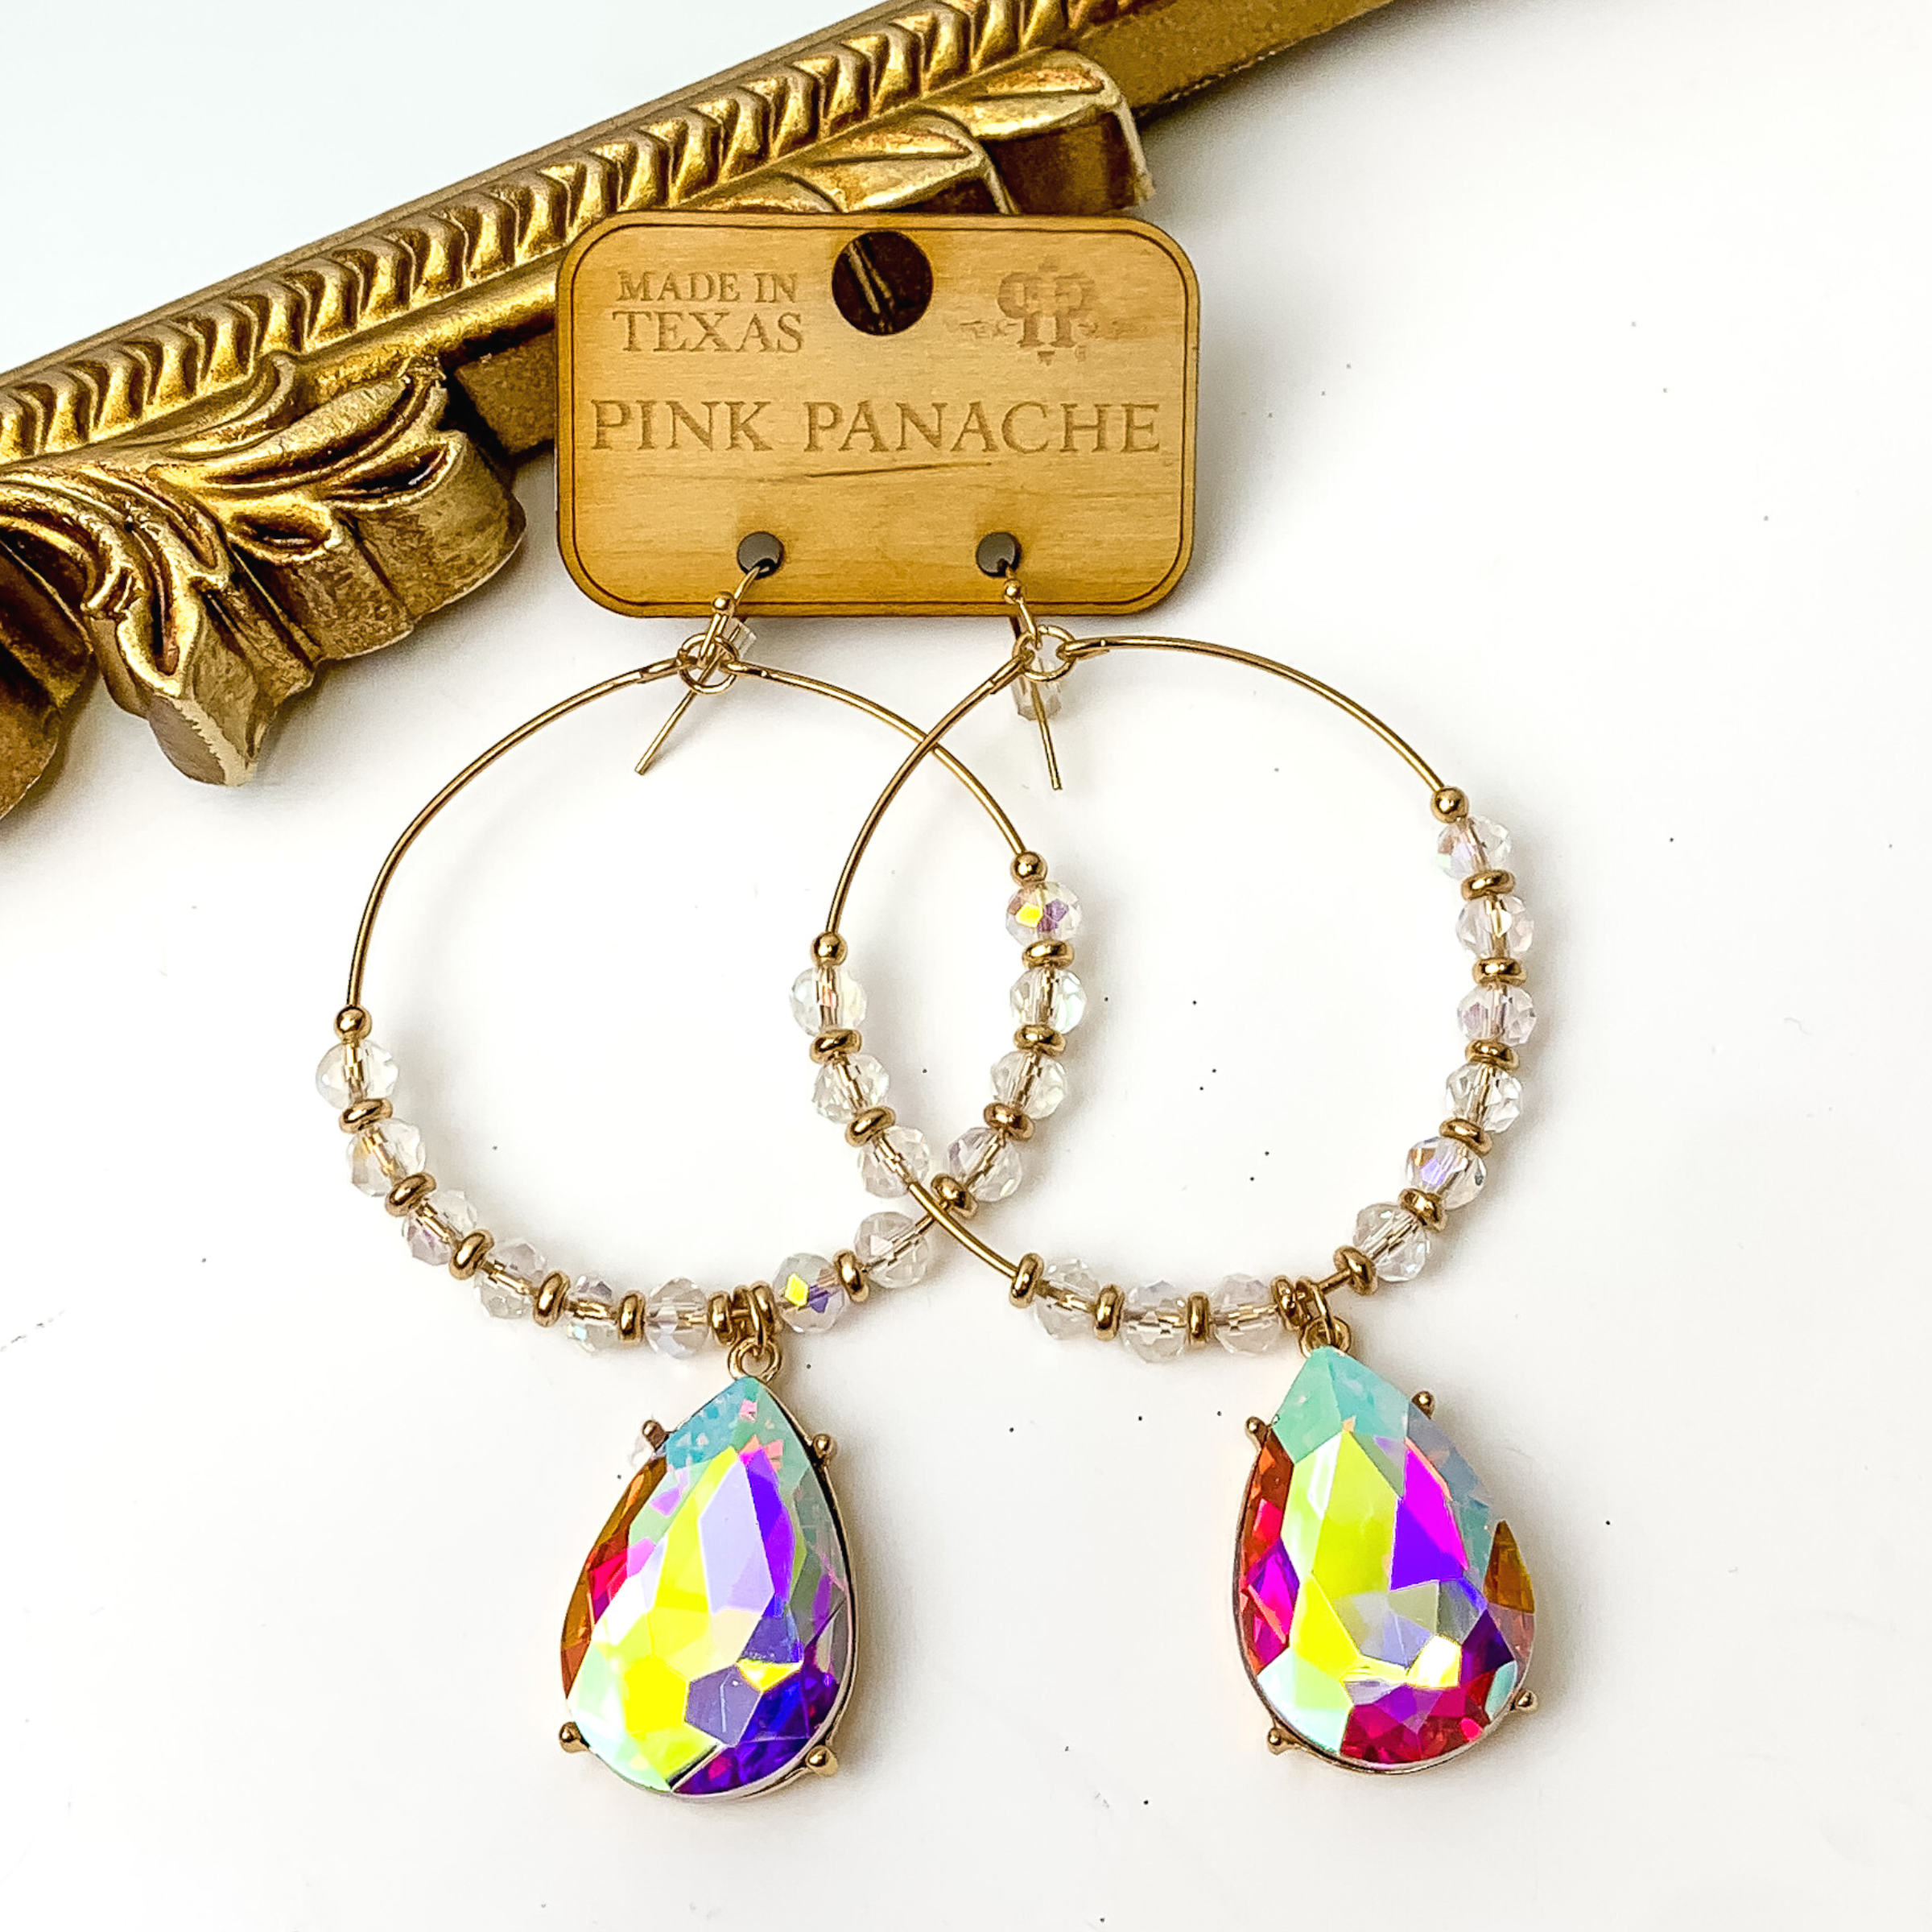 Large gold hoop earrings with clear ab and gold beads. These hoops also include a teardrop ab crystal charm. These earrings are pictured on a white background with a gold mirror in the top left corner. 